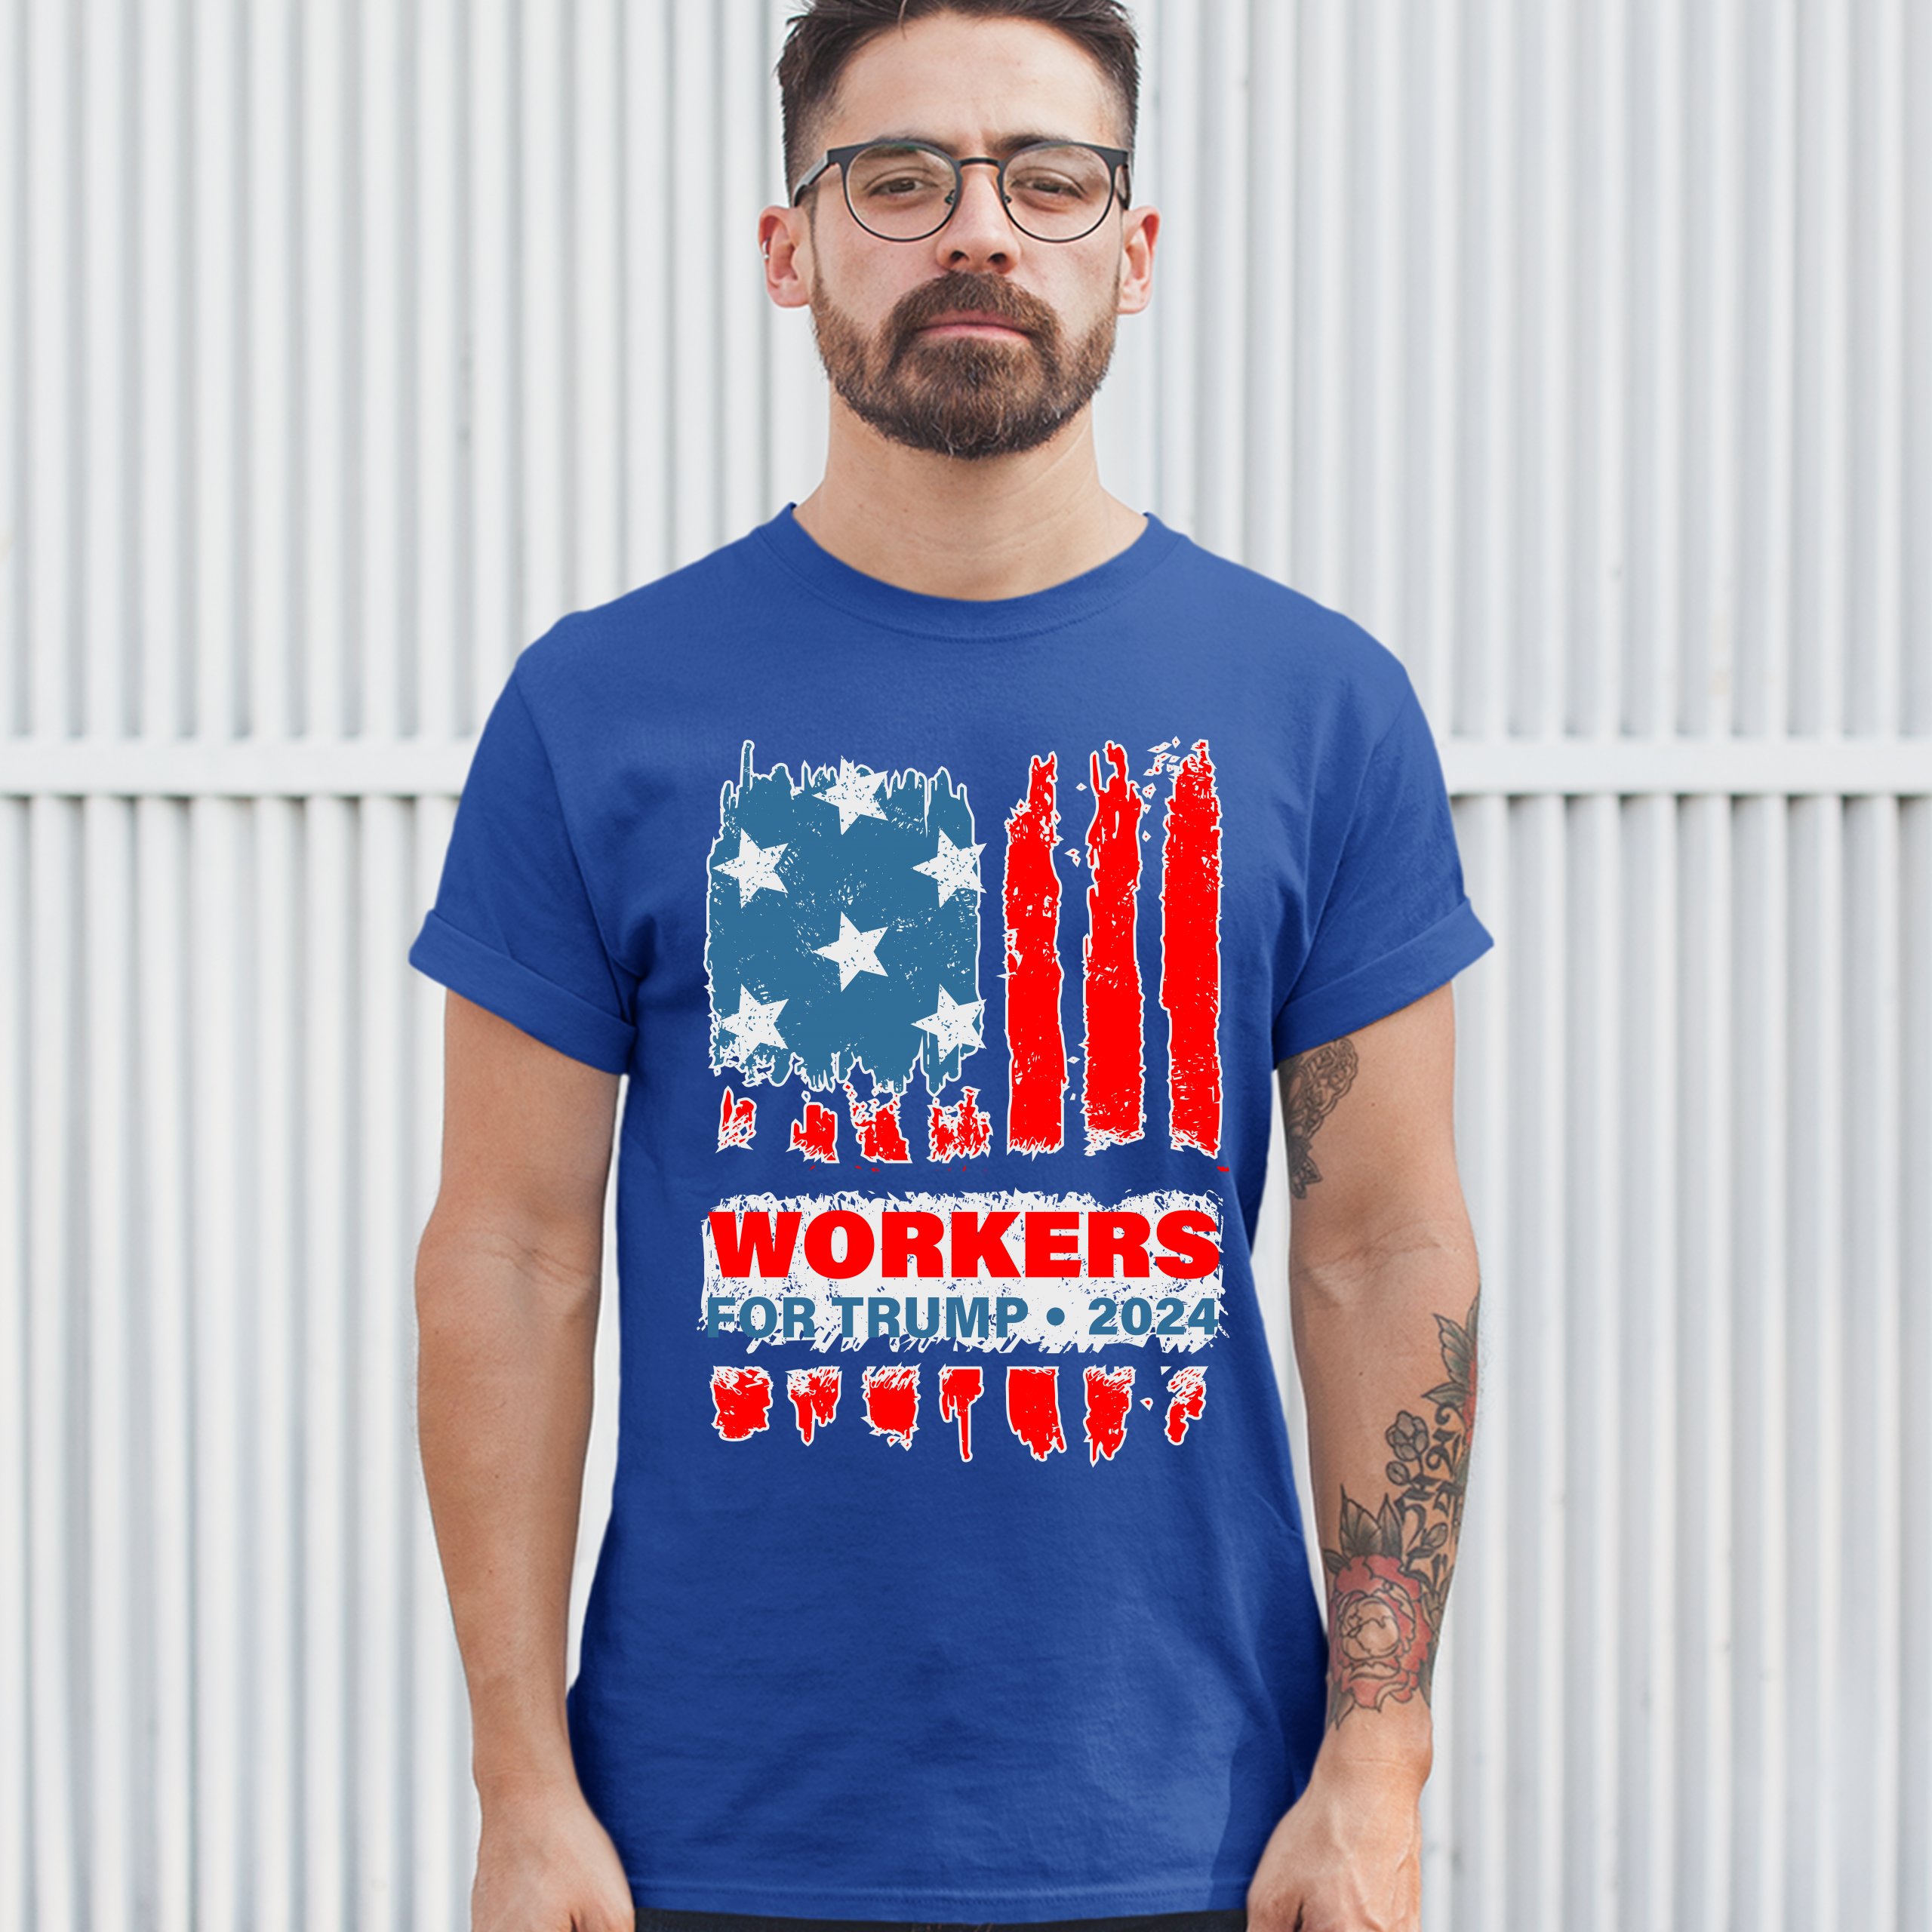 Workers for Trump 2024 Tshirt Conservative Vote Red Donald Trump Men's